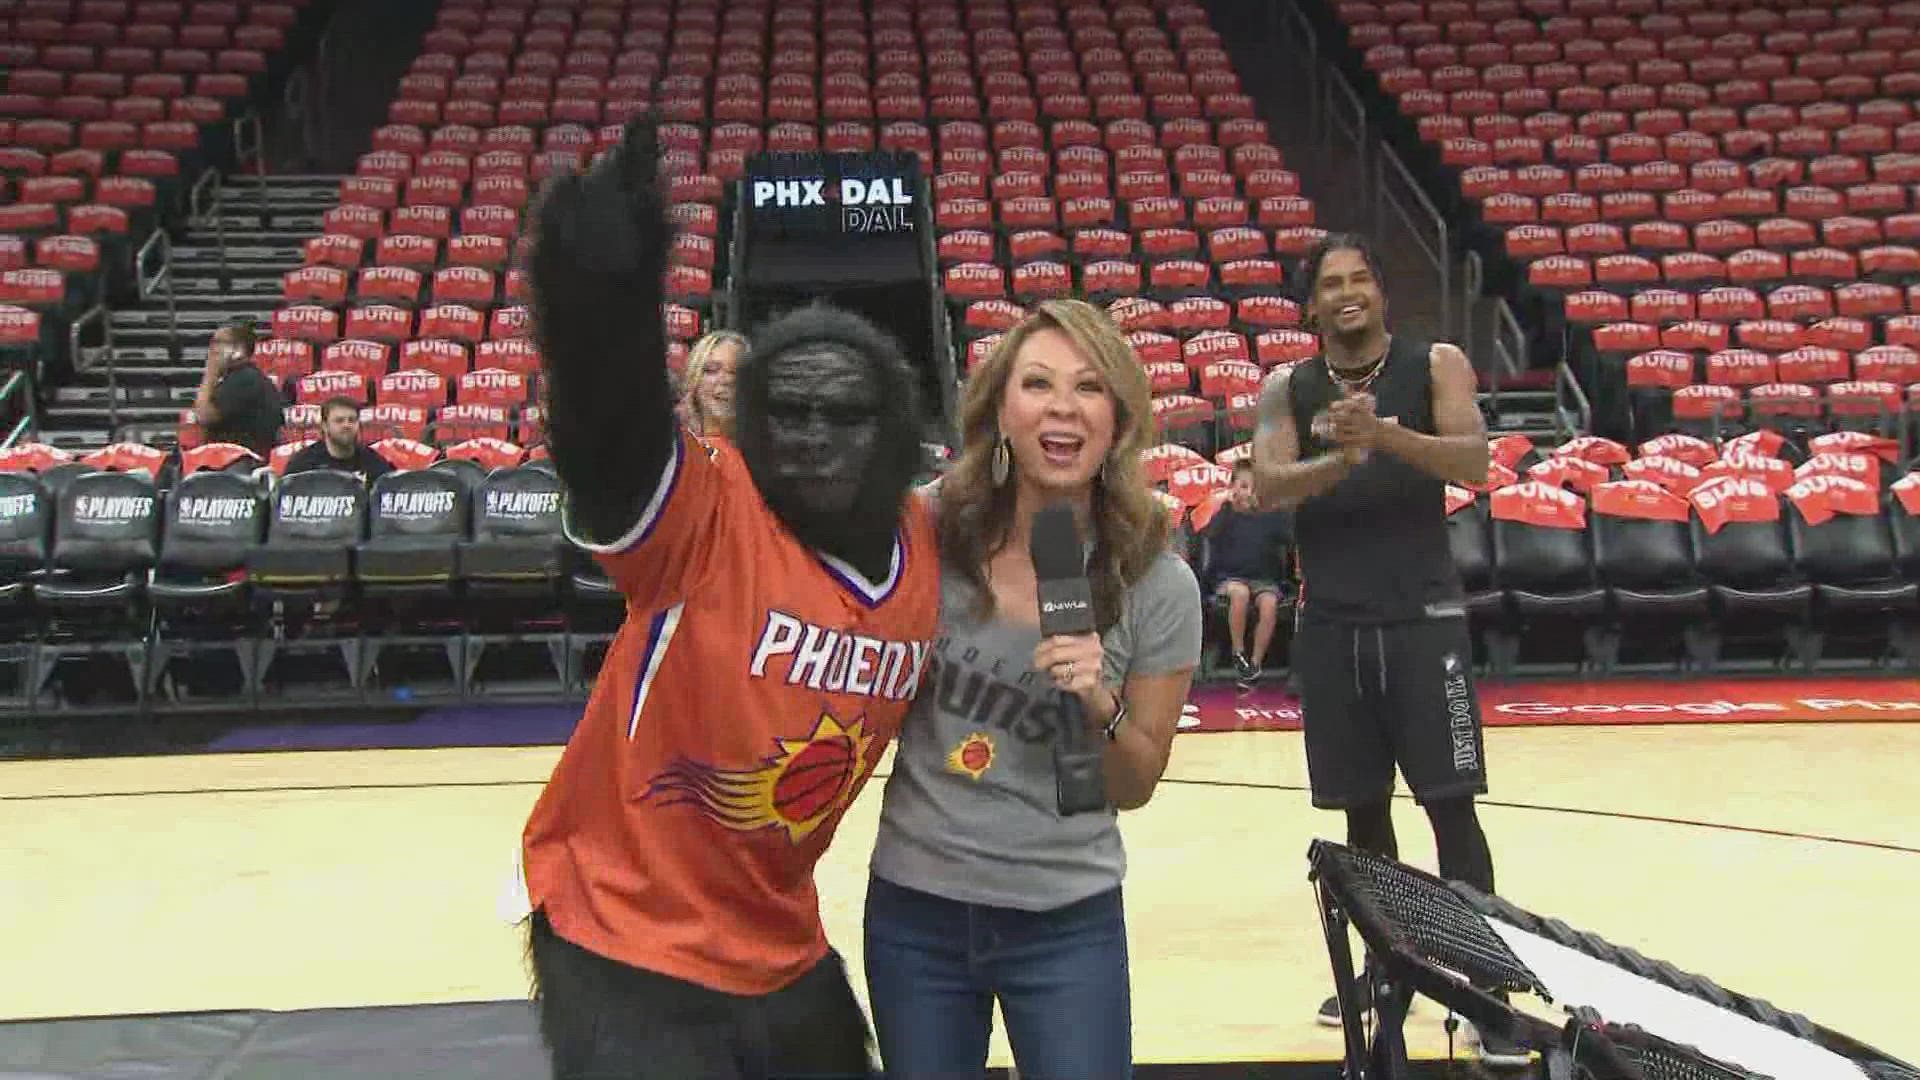 Halftime at the Footprint Center is a party! Here's a preview of what you can expect as the Suns mascot, Go the Gorilla, completes a Gorilla Dunk with Tram Mai.